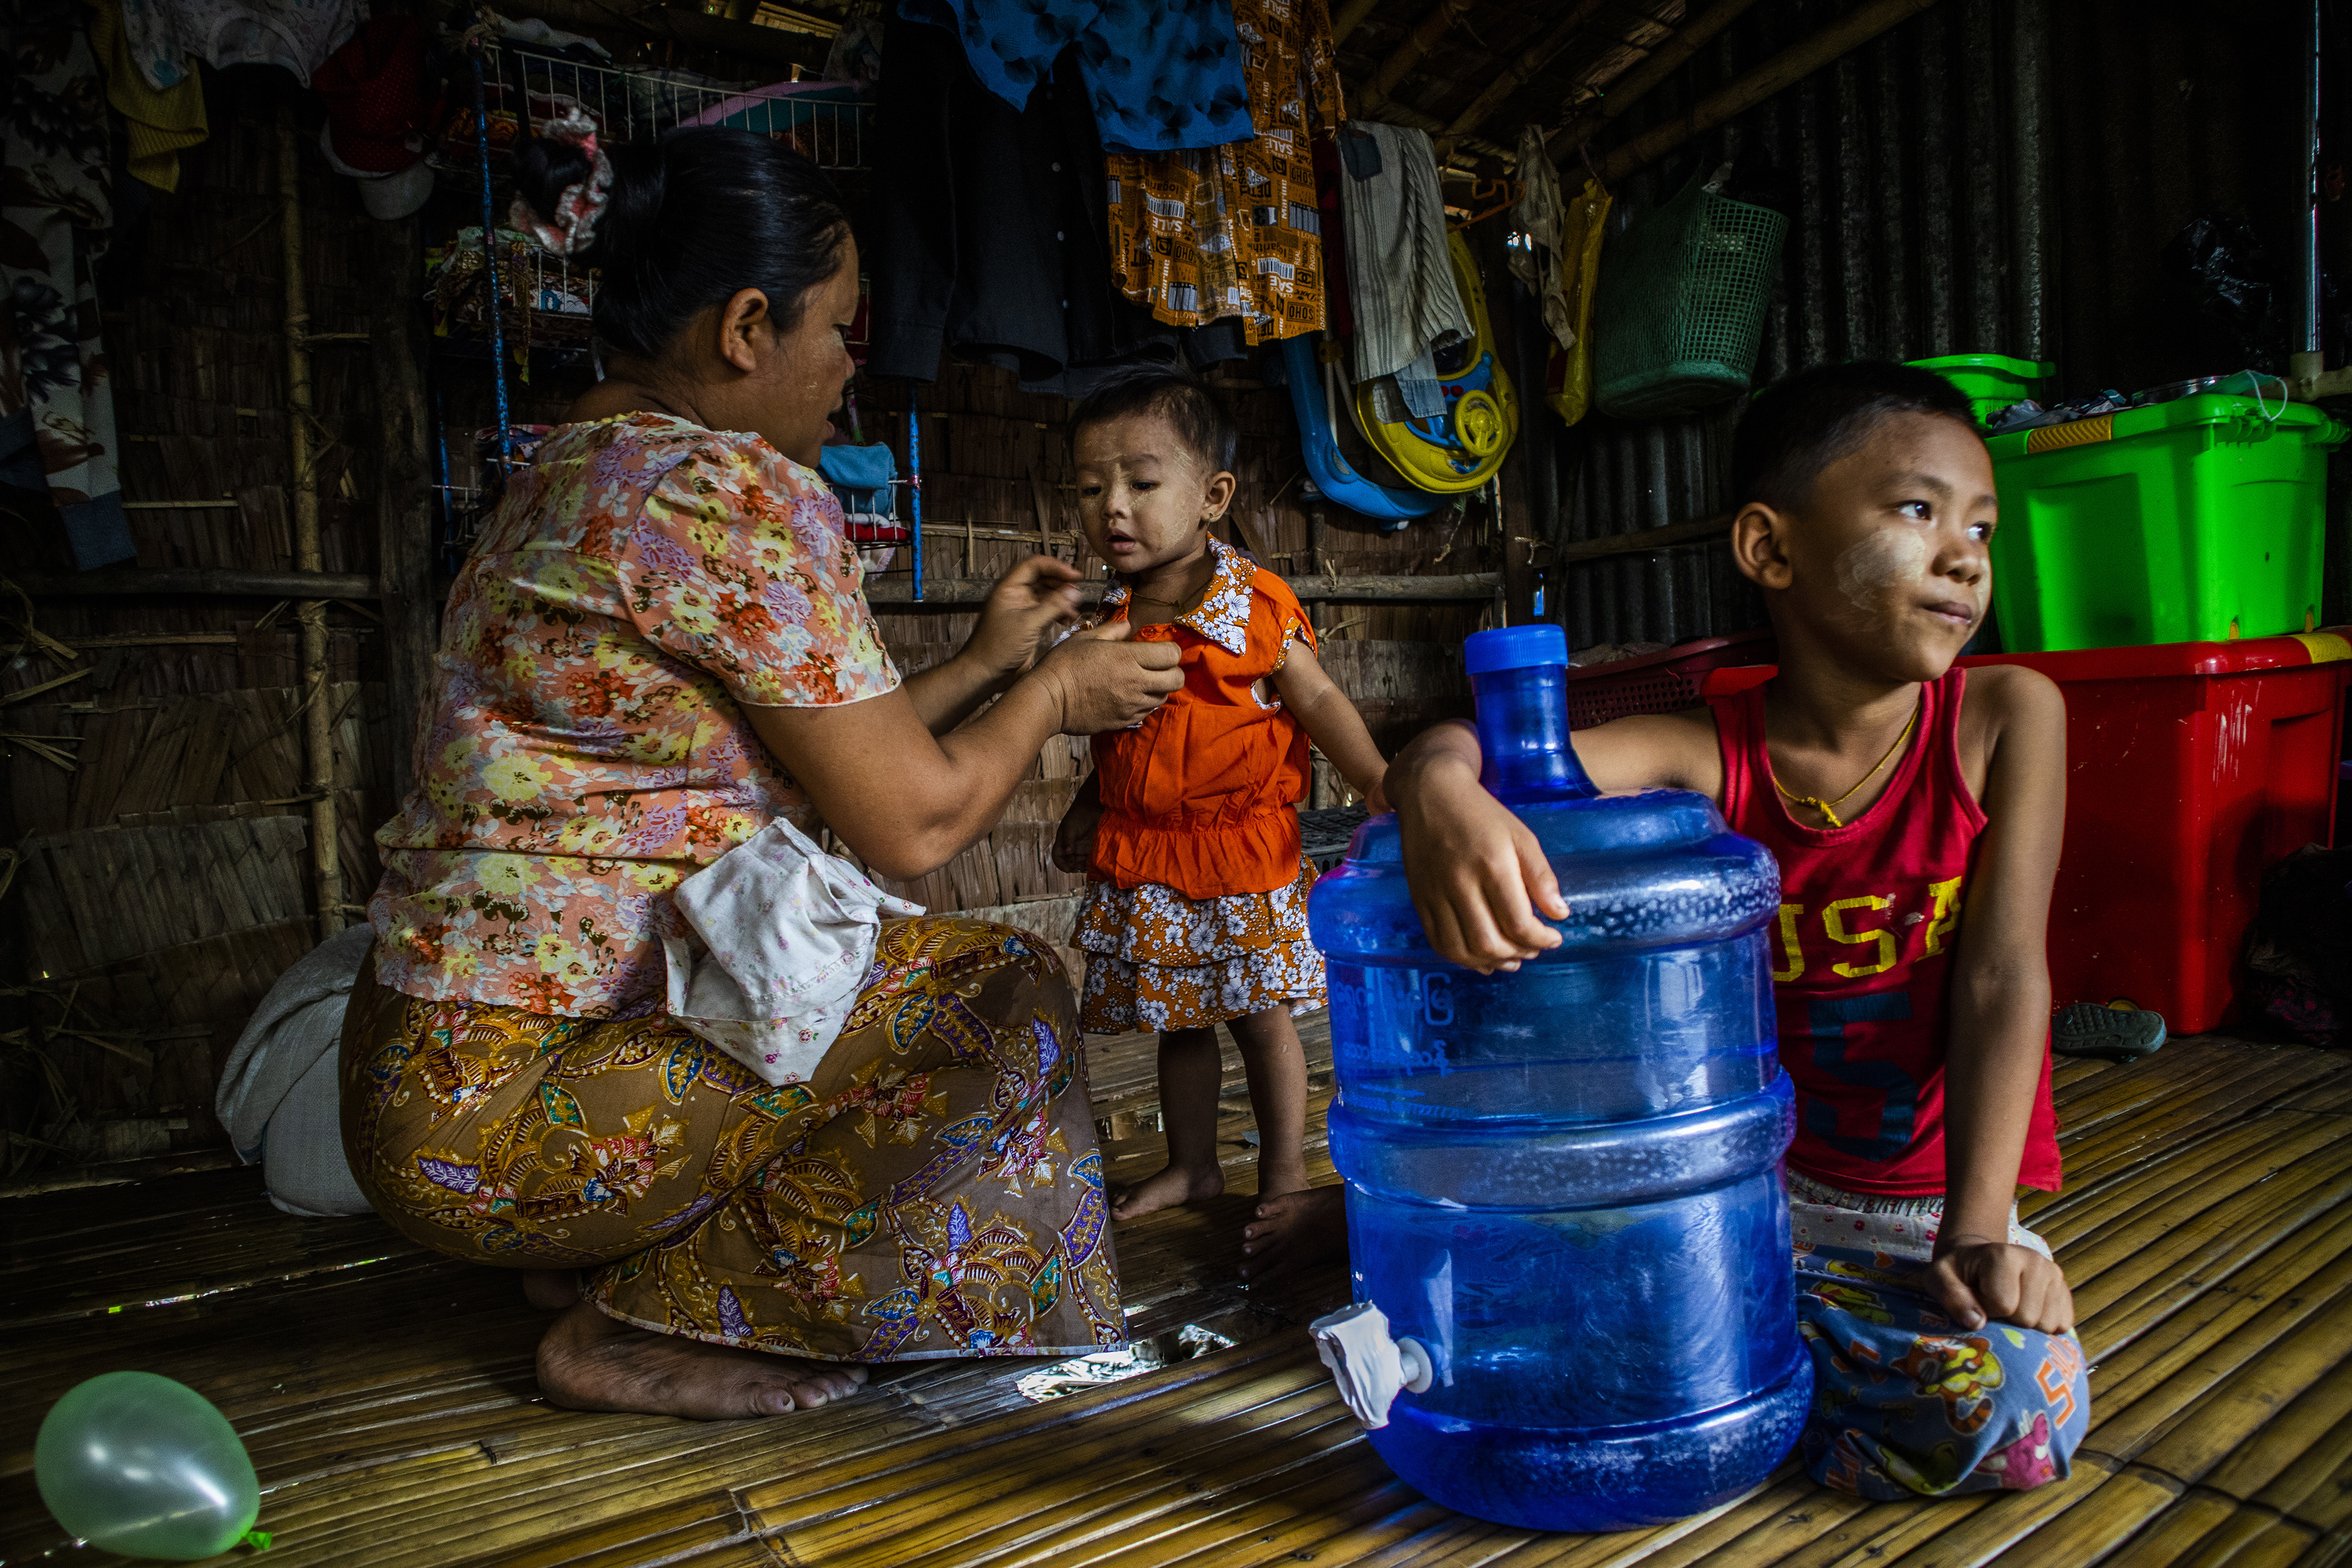 In wake of crisis, UNICEF brings clean water to vulnerable urban families 